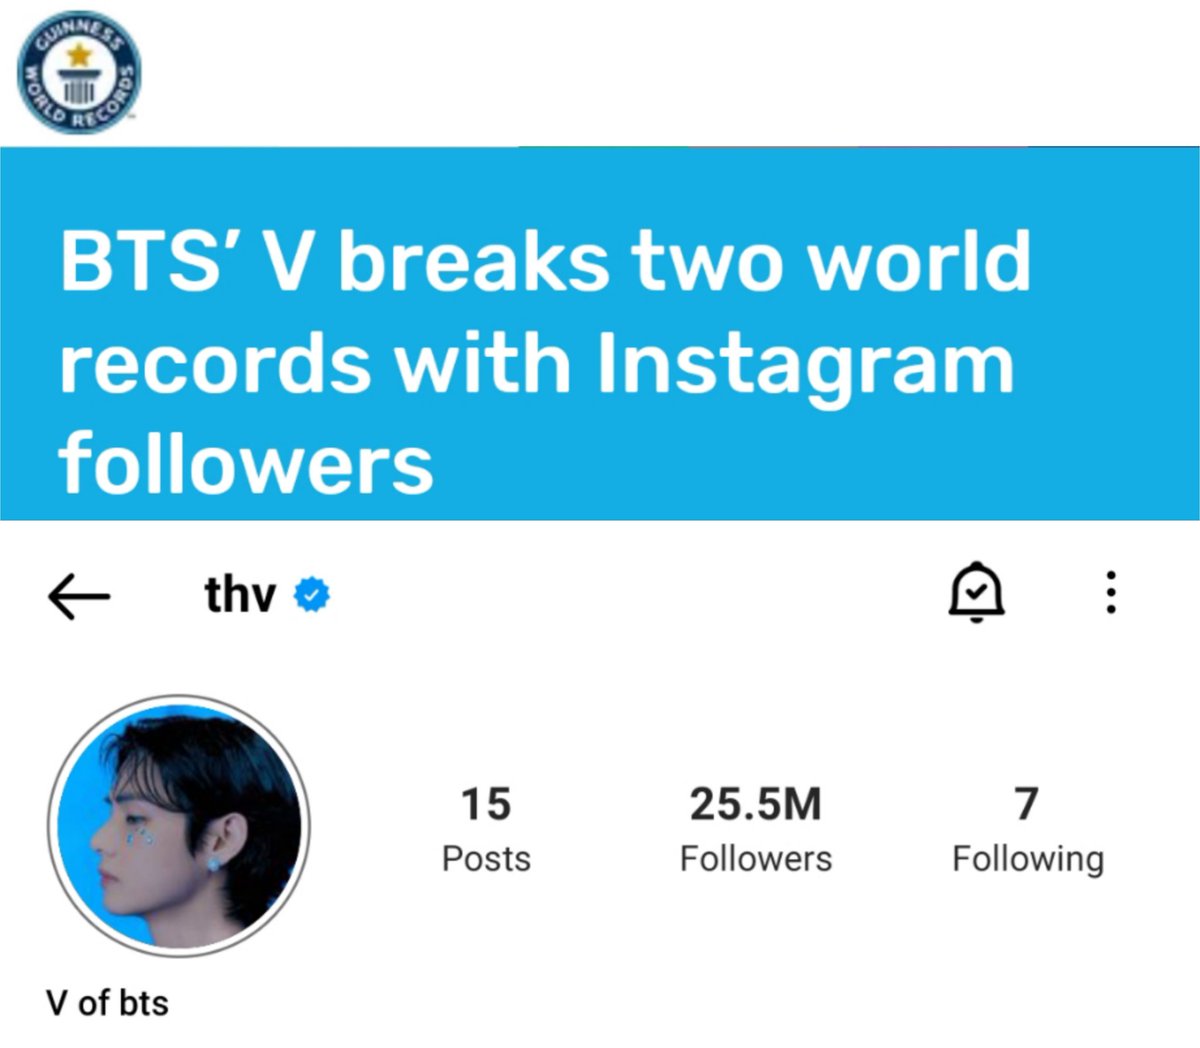 BTS' V breaks two world records with Instagram followers